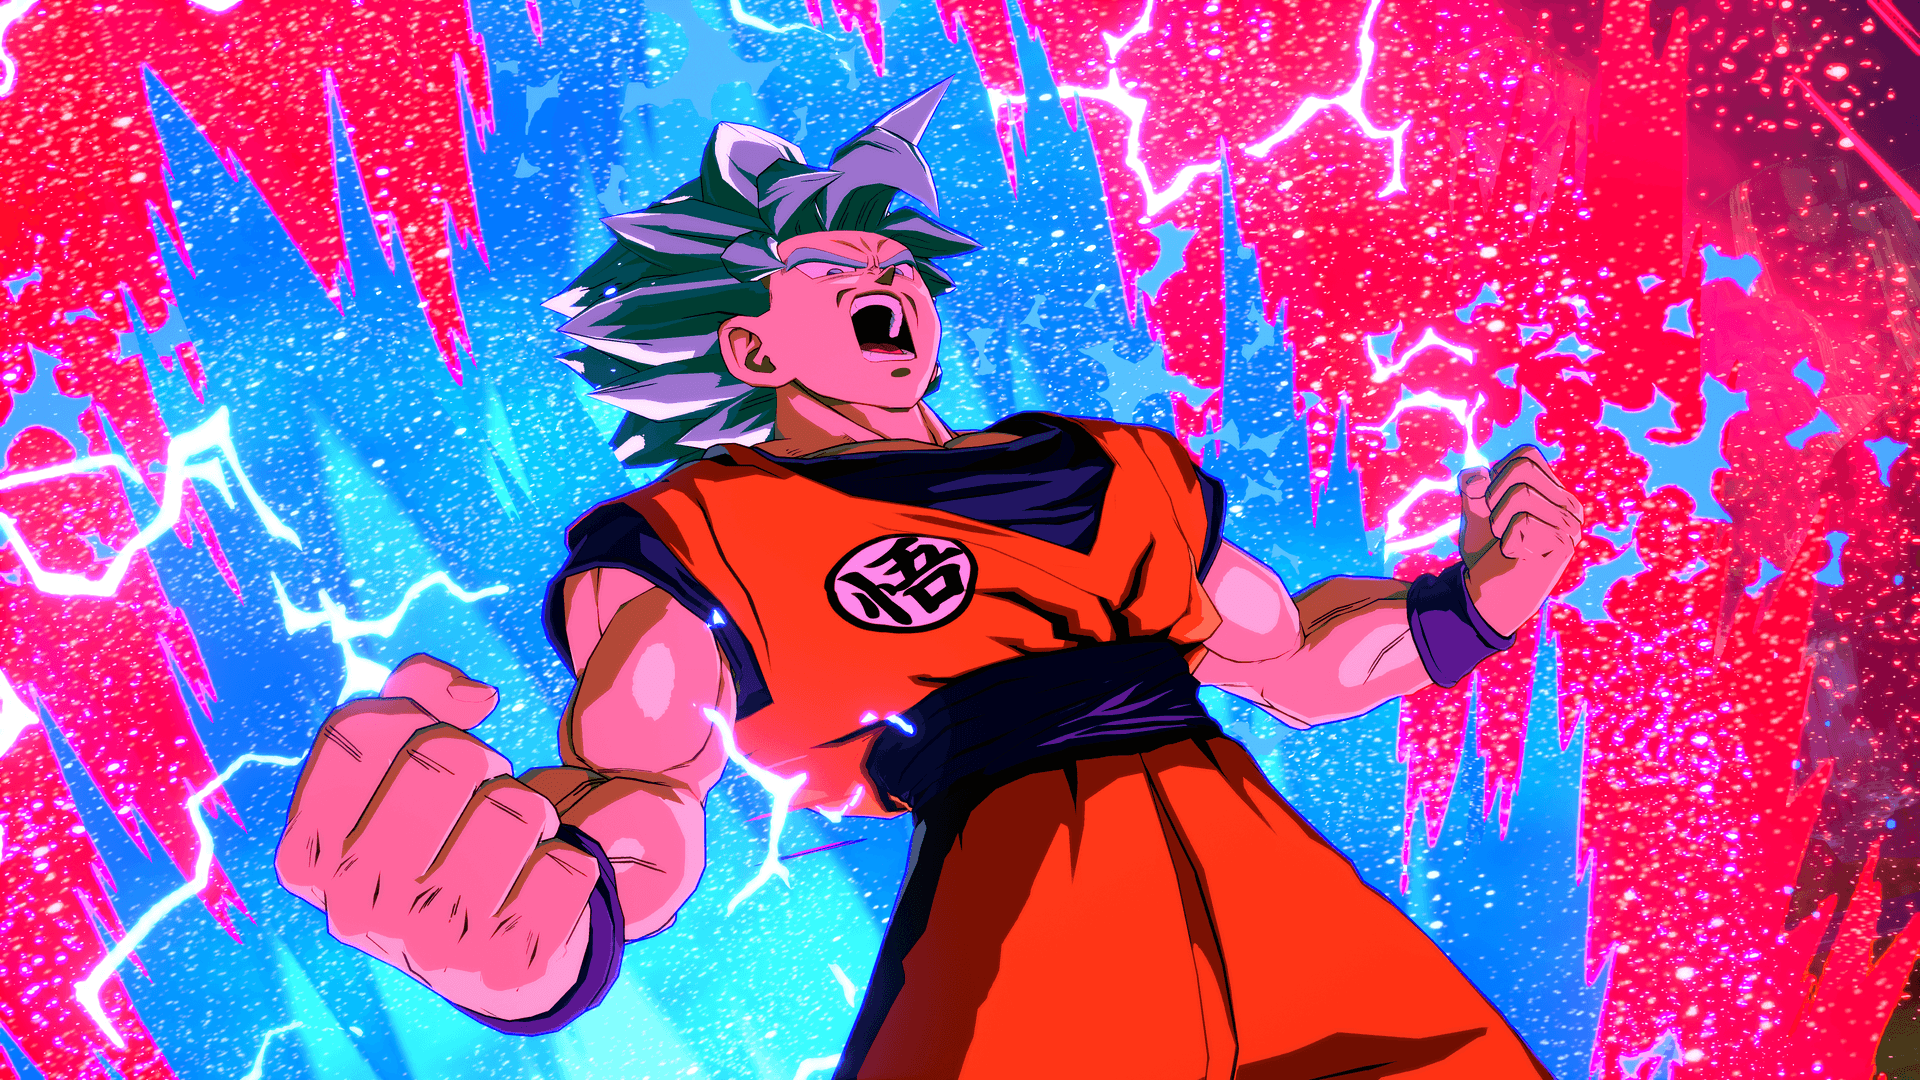 Goku Kaioken Unleashed: A Display Of Power And Determination Wallpaper